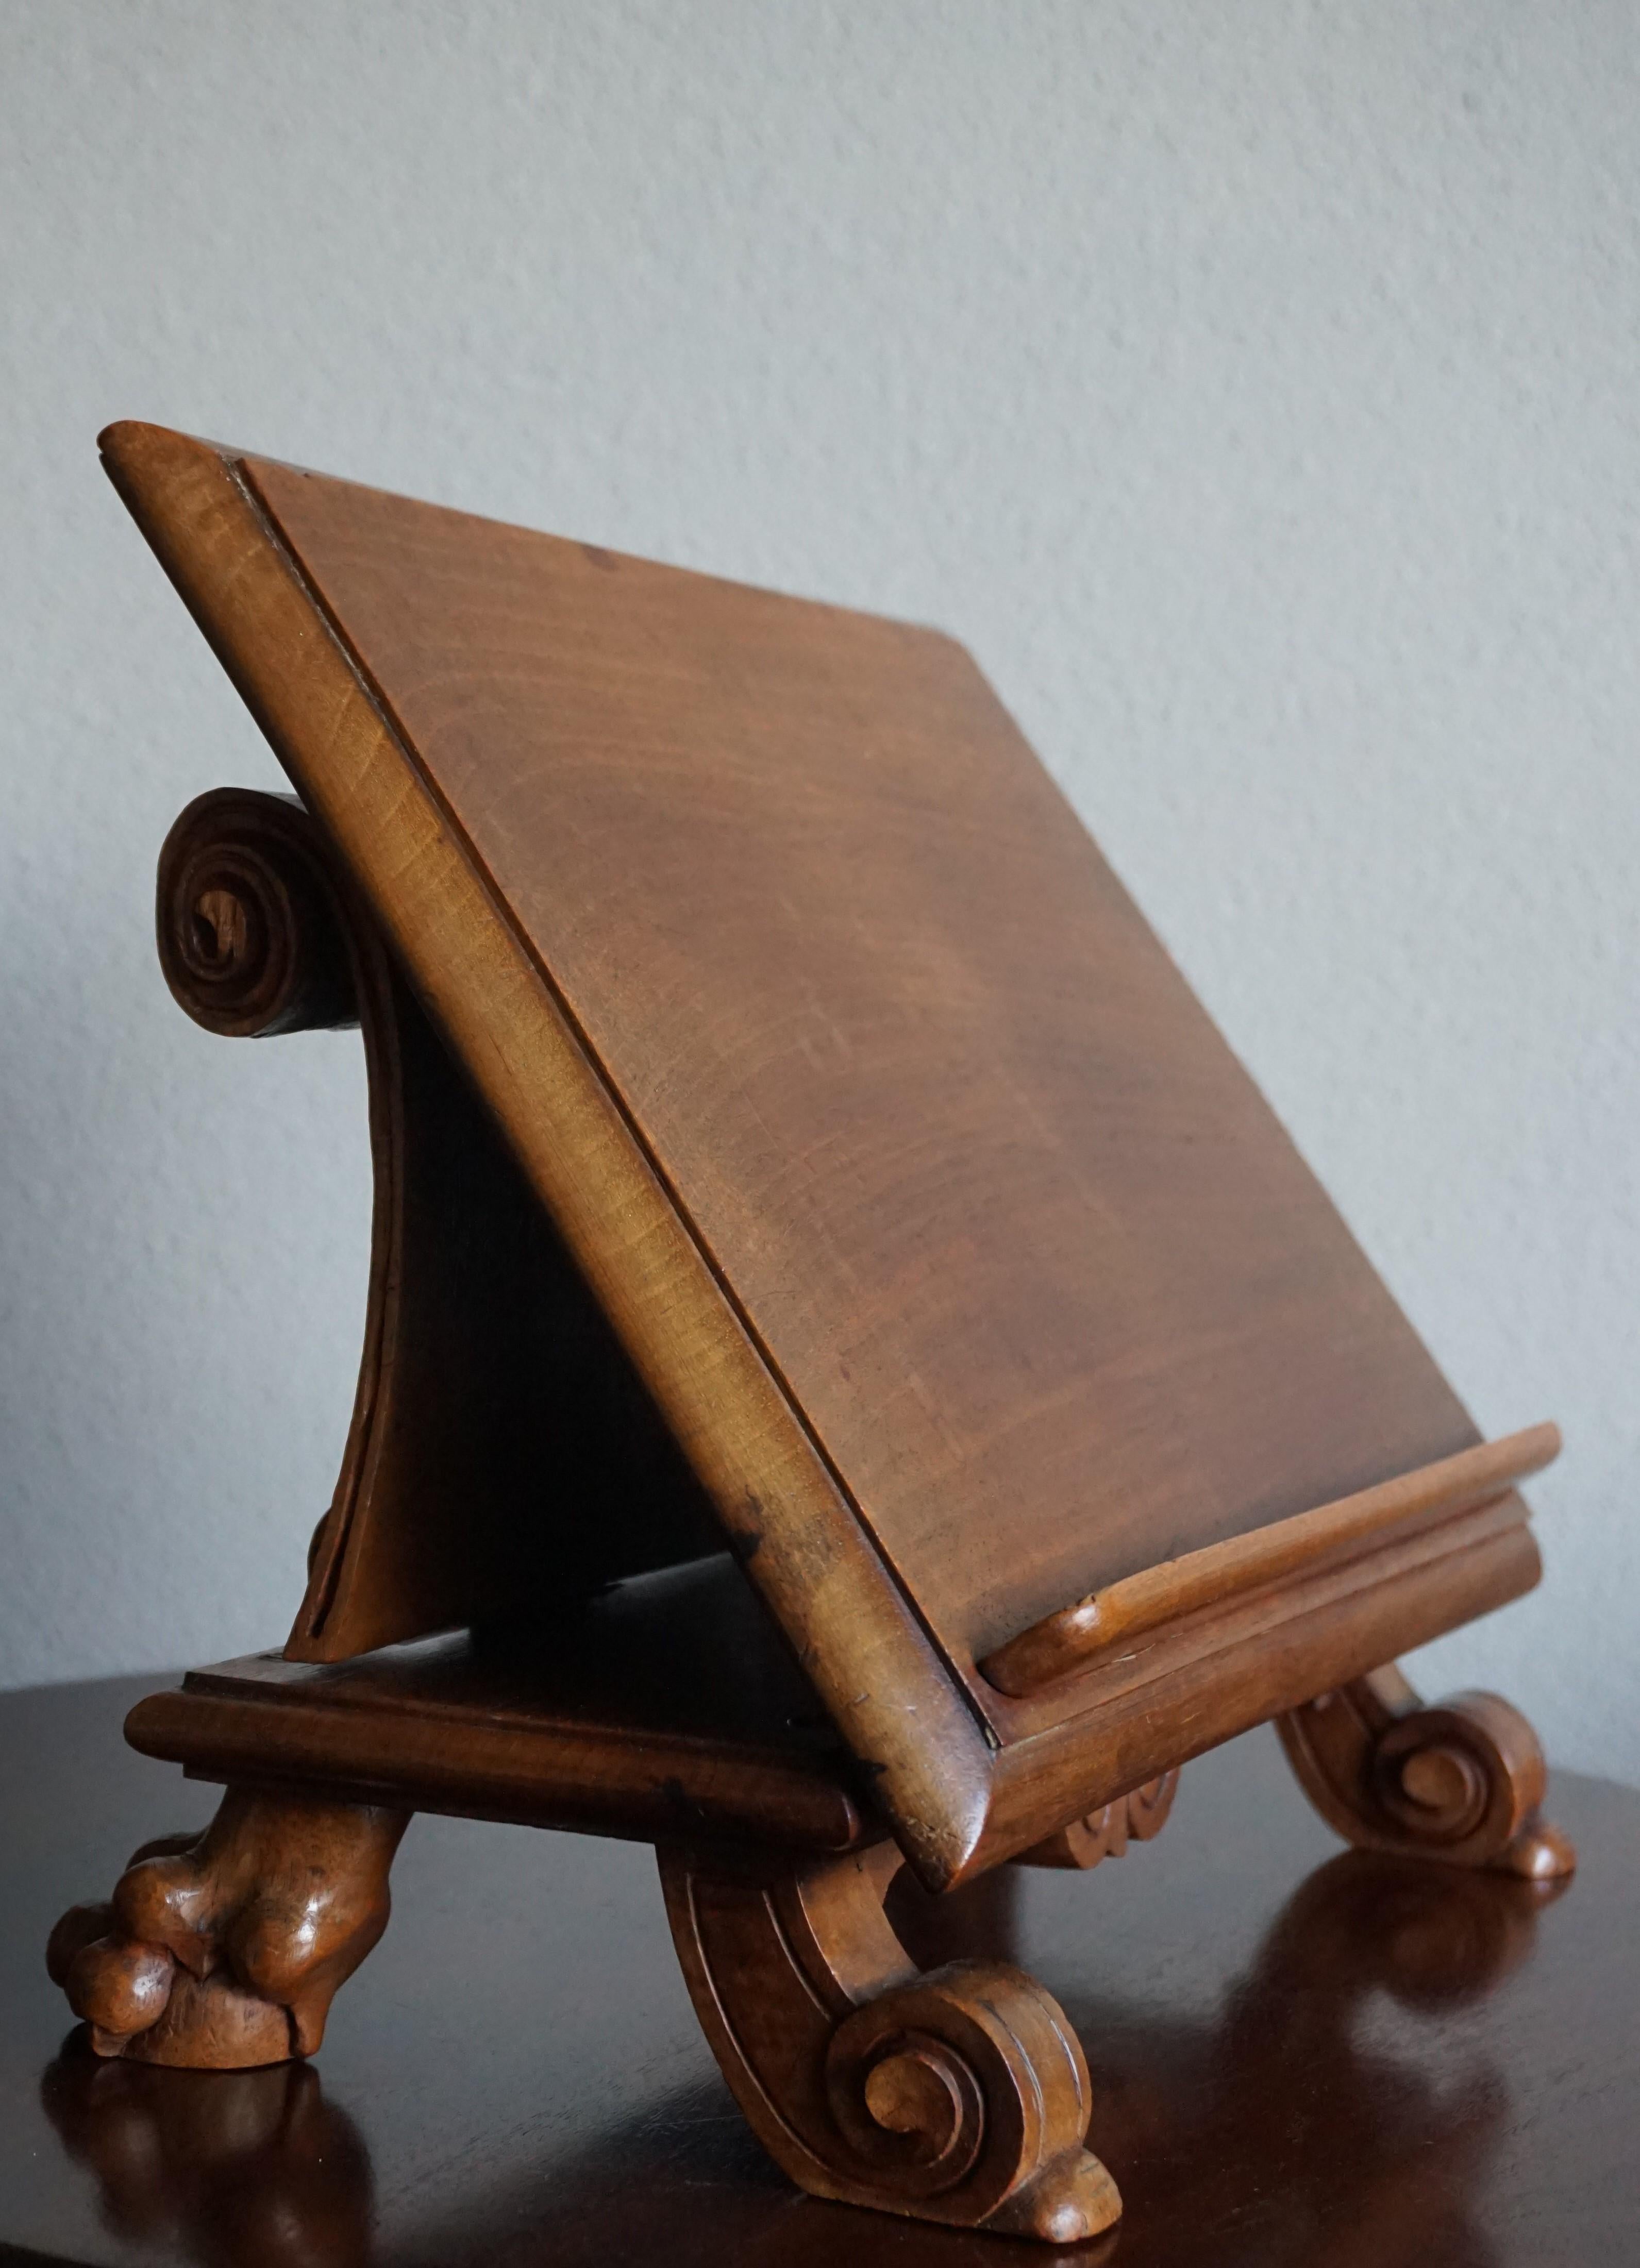 One of a kind antique book stand with scrolled leaf back.

If you are looking for the perfect way to display a book or photo or otherwise then this unique and decorative bookstand could be yours to own and enjoy soon. All handcrafted and hand carved